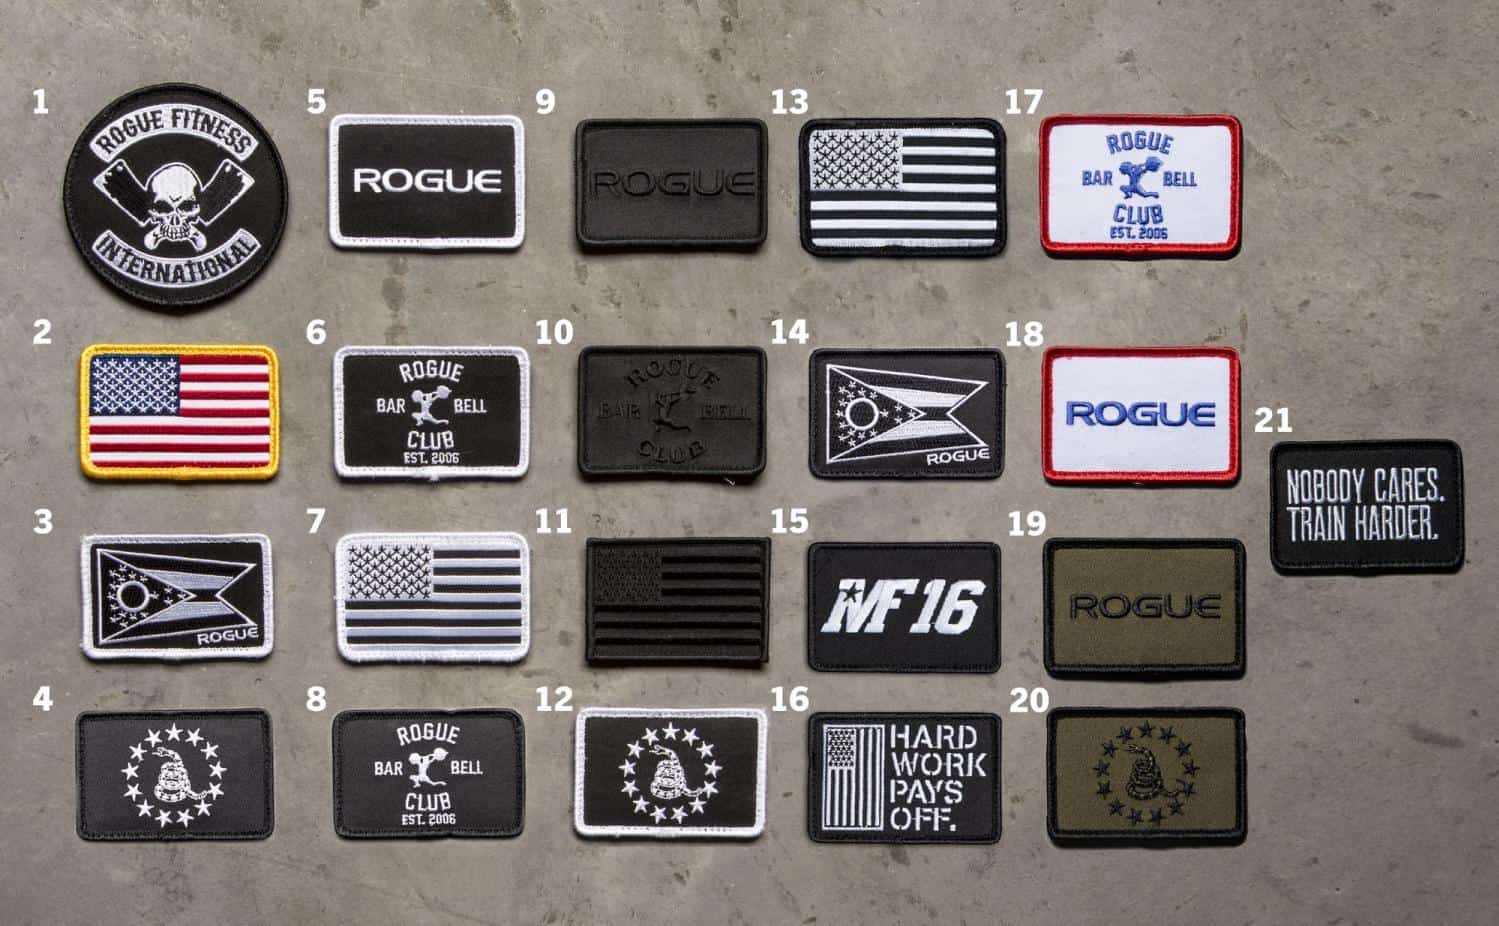 Rogue 5.11 TacTec Plate Carrier patches